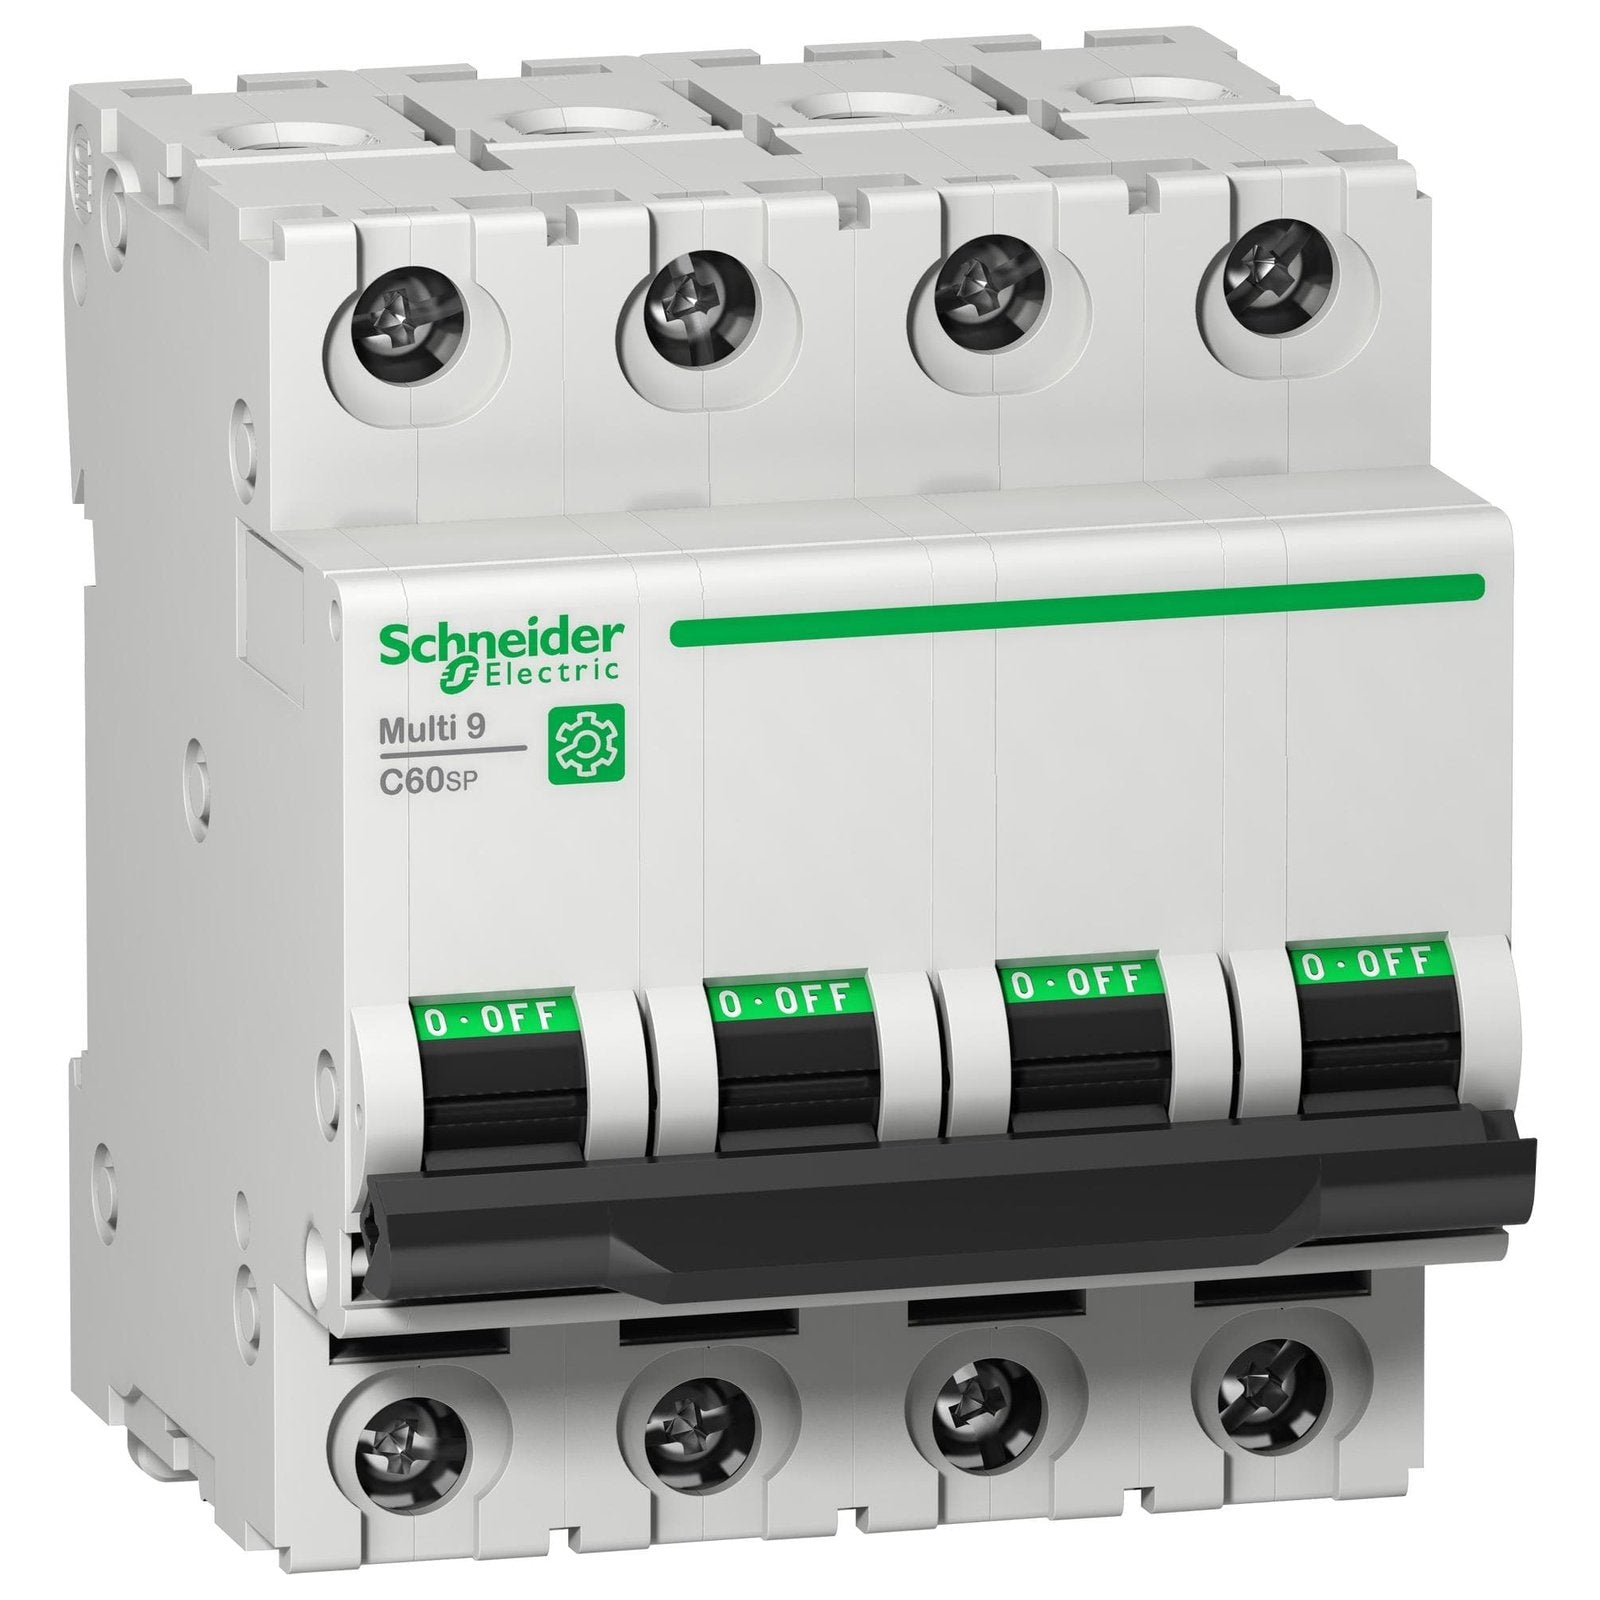 Schneider 2-Pole Miniature Circuit Breaker - Buy Online for Precise Circuit Protection at Supply Master Power Management & Protection Buy Tools hardware Building materials